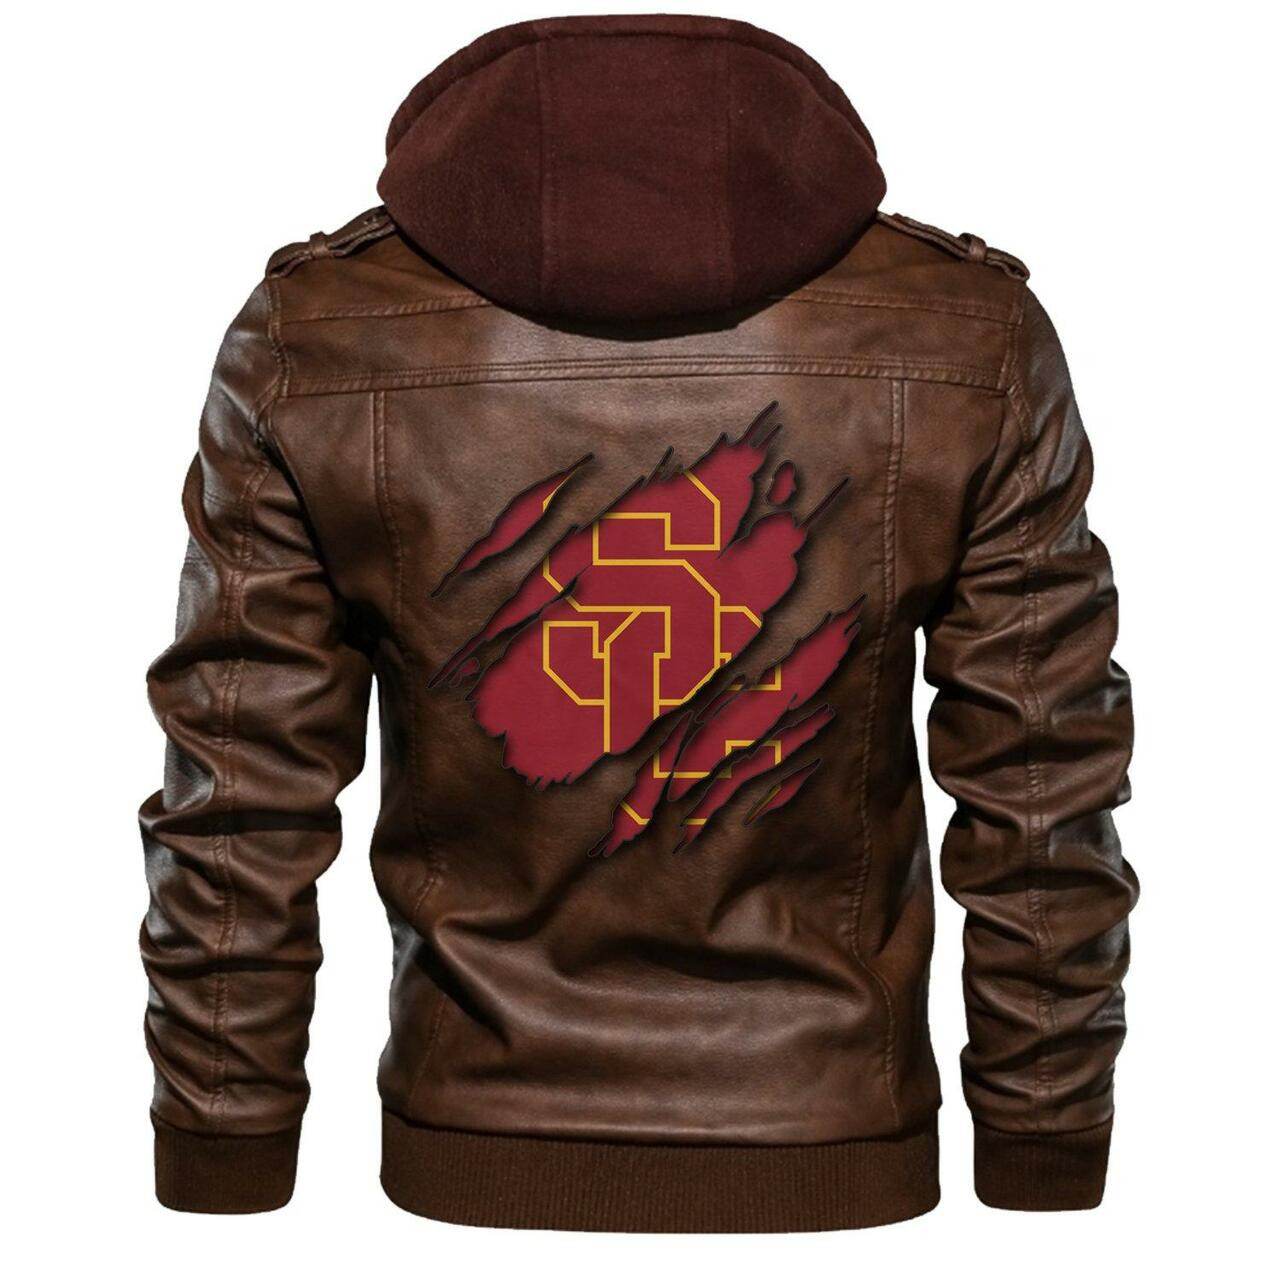 Our store has all of the latest leather jacket 79